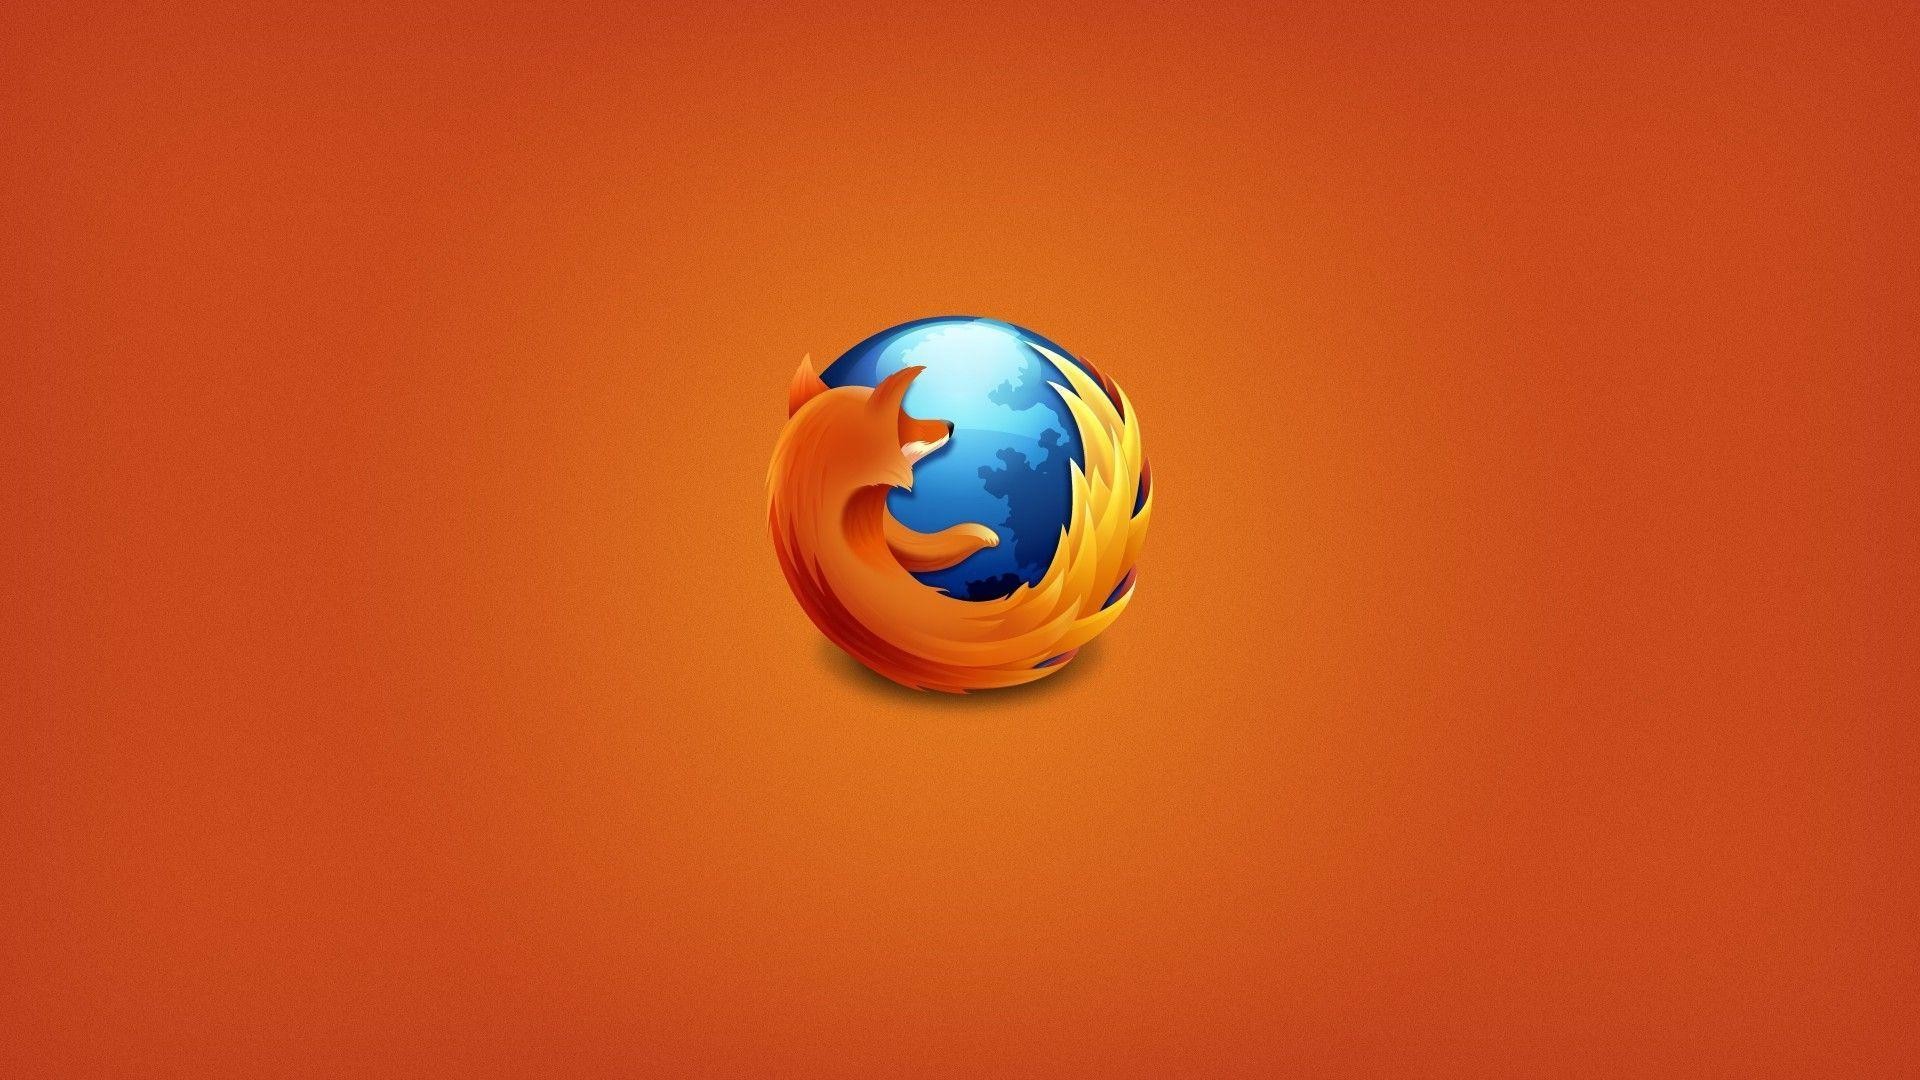 1920x1080 Mozilla Firefox Images Background 1080p #3364 Wallpaper .